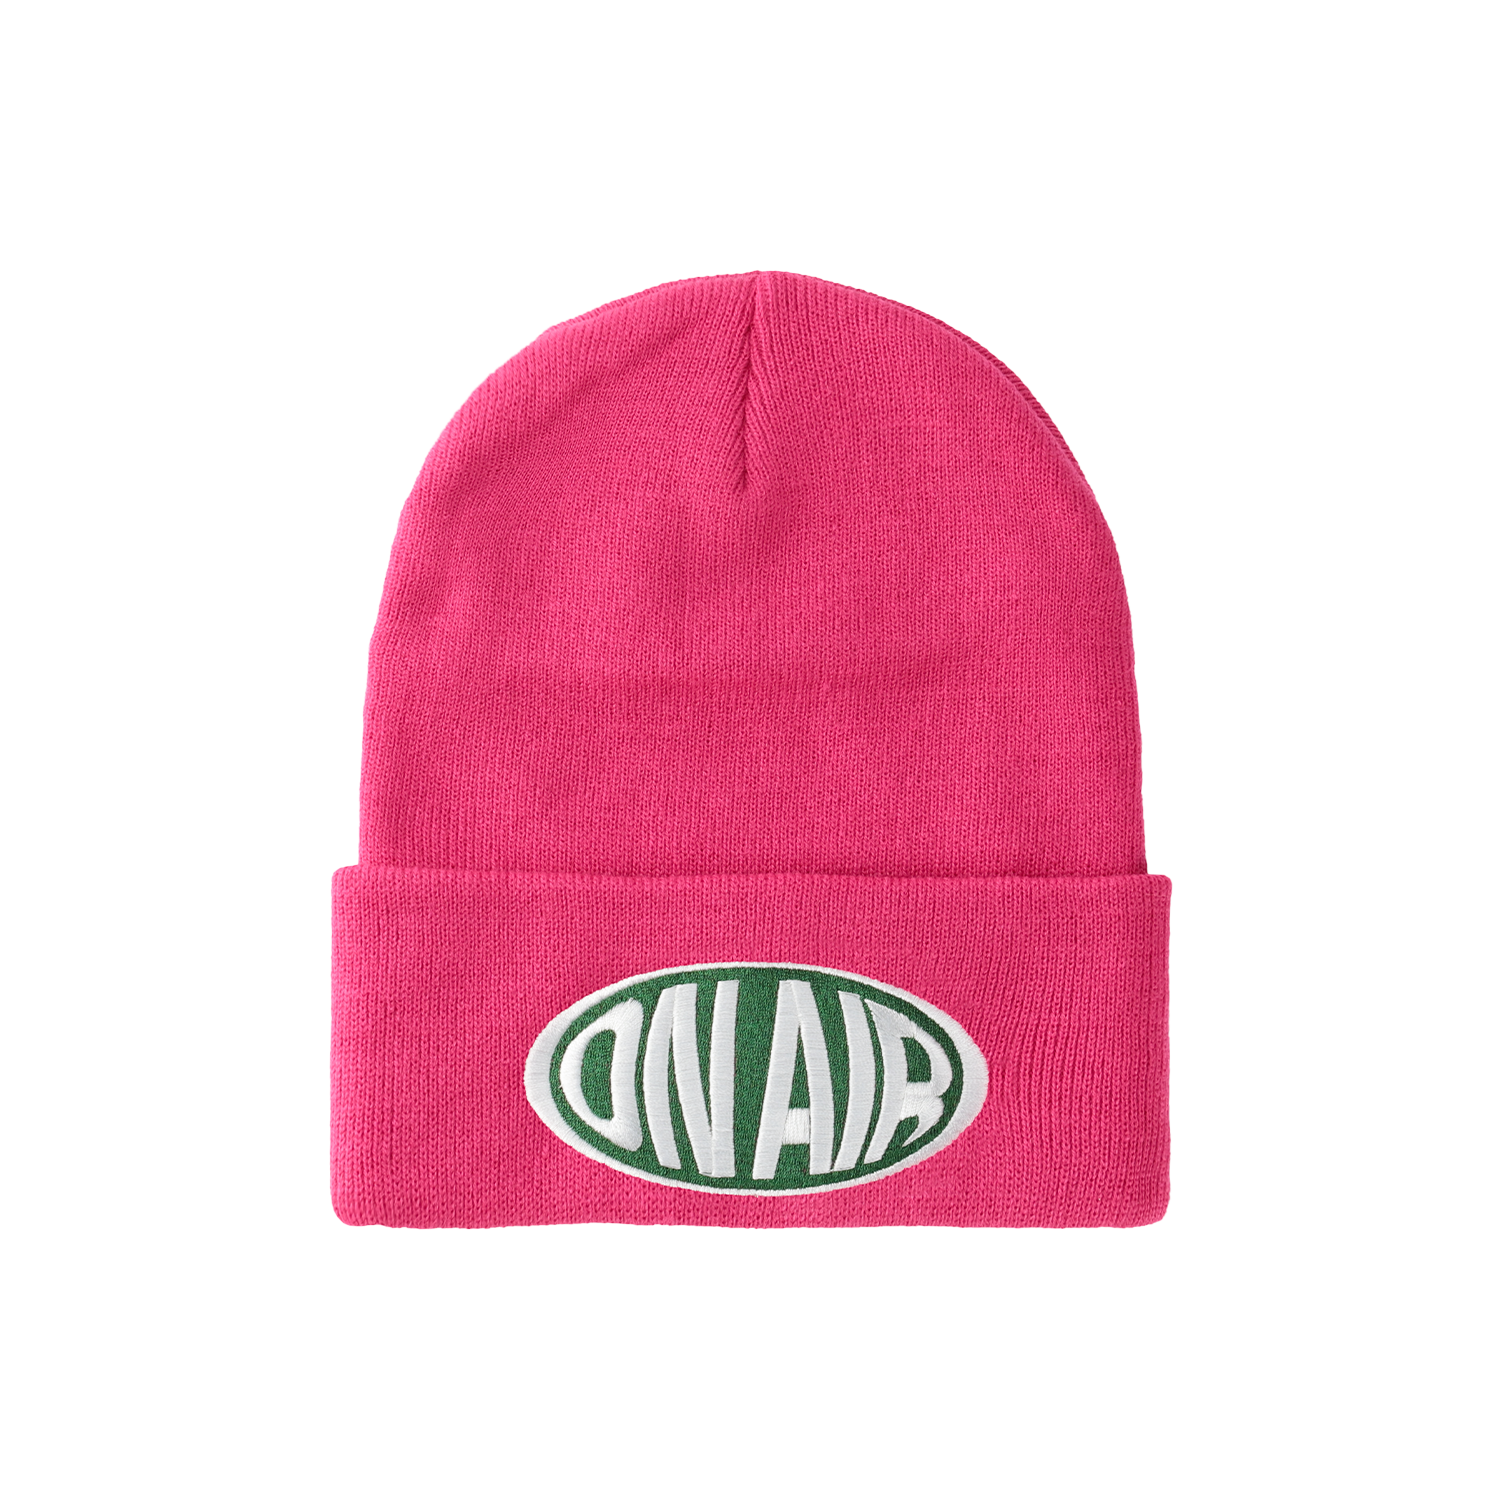 ON AIR OVAL LOGO PLAIN KNIT HAT｜HOT PINK